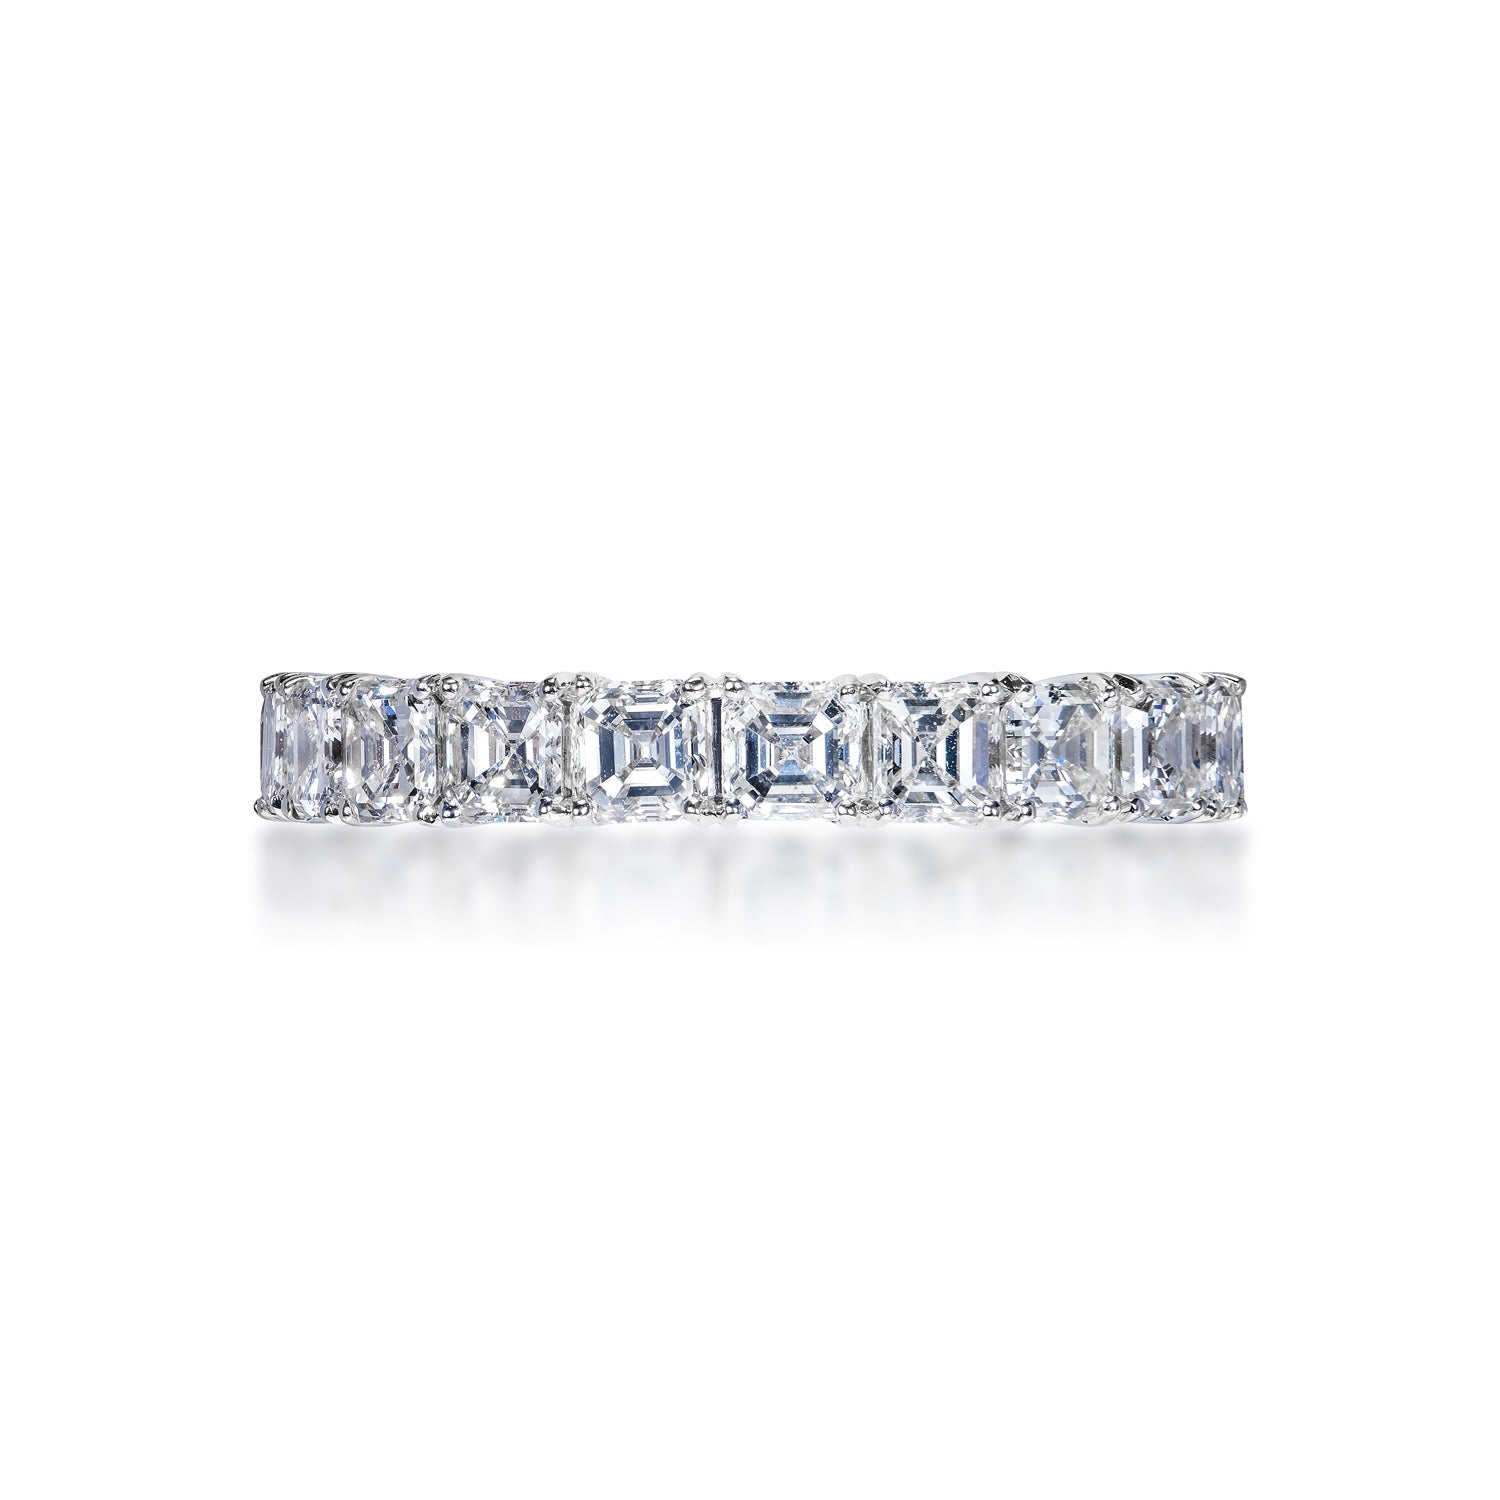 Della 3 Carat Asscher Cut Diamond Eternity Band in 18k White Gold Shared Prong Front View